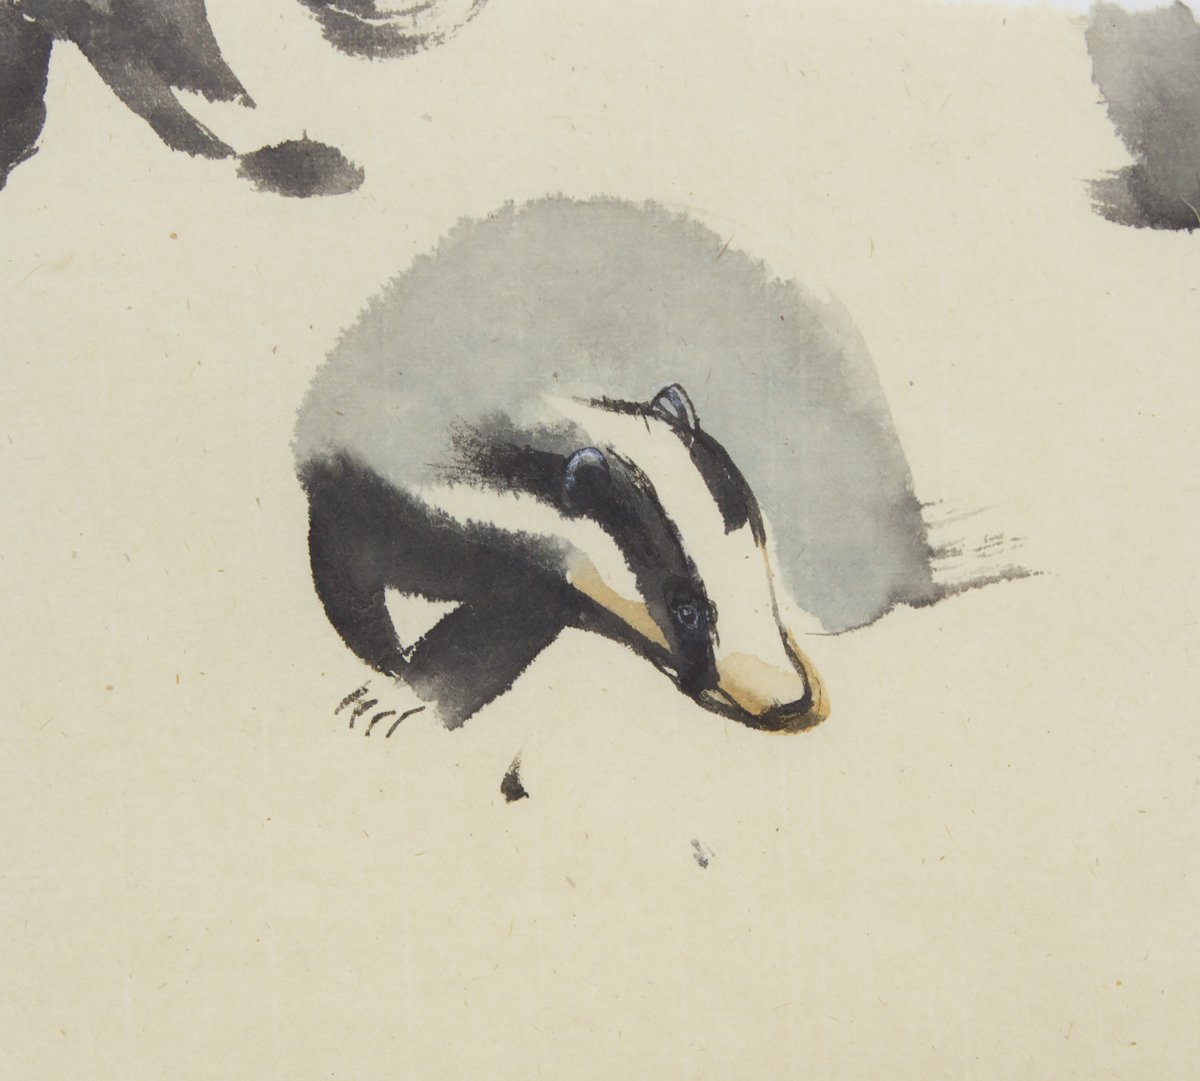 'There is no lockdown summer evening better spent than sitting quietly in the company of badgers.' Artist Claire Harkess paints wildlife within One Square Mile of home. For this and other animals see rsw.org.uk/digital-exhibi… until Monday 19th